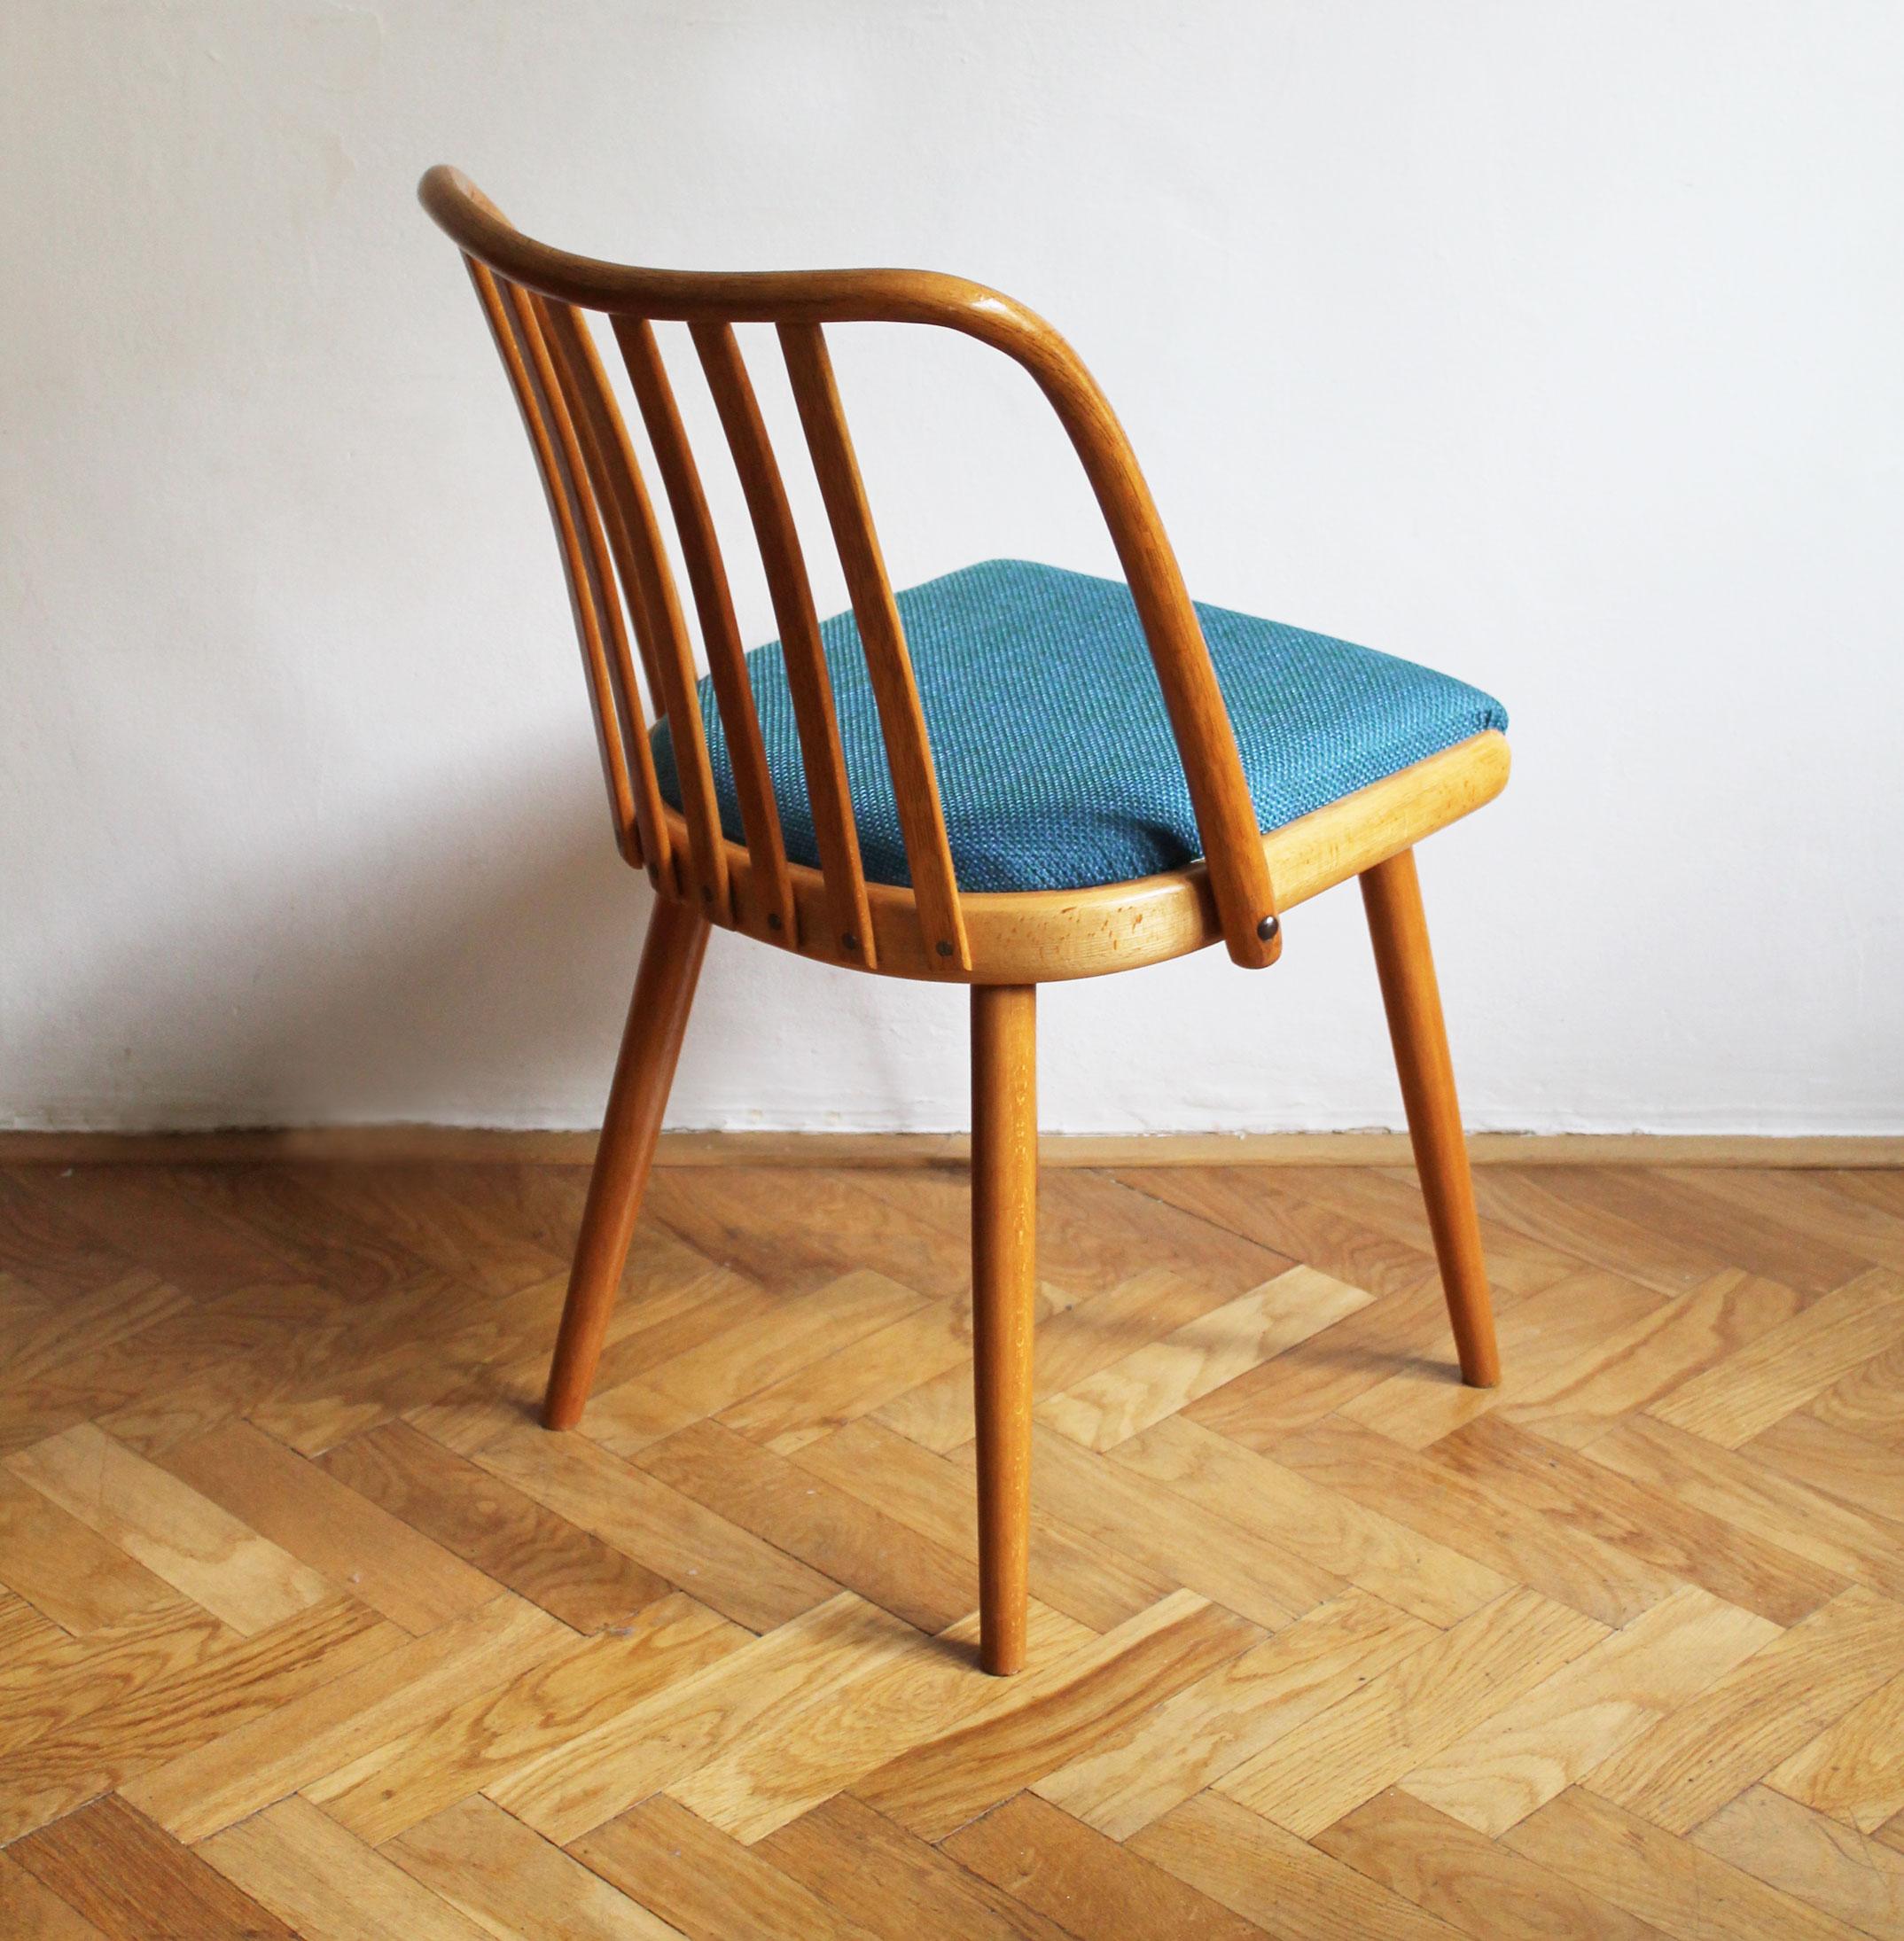 Lacquered 1960's Mid Century Dining Chair Model U - 300 by Antonin Suman For Sale